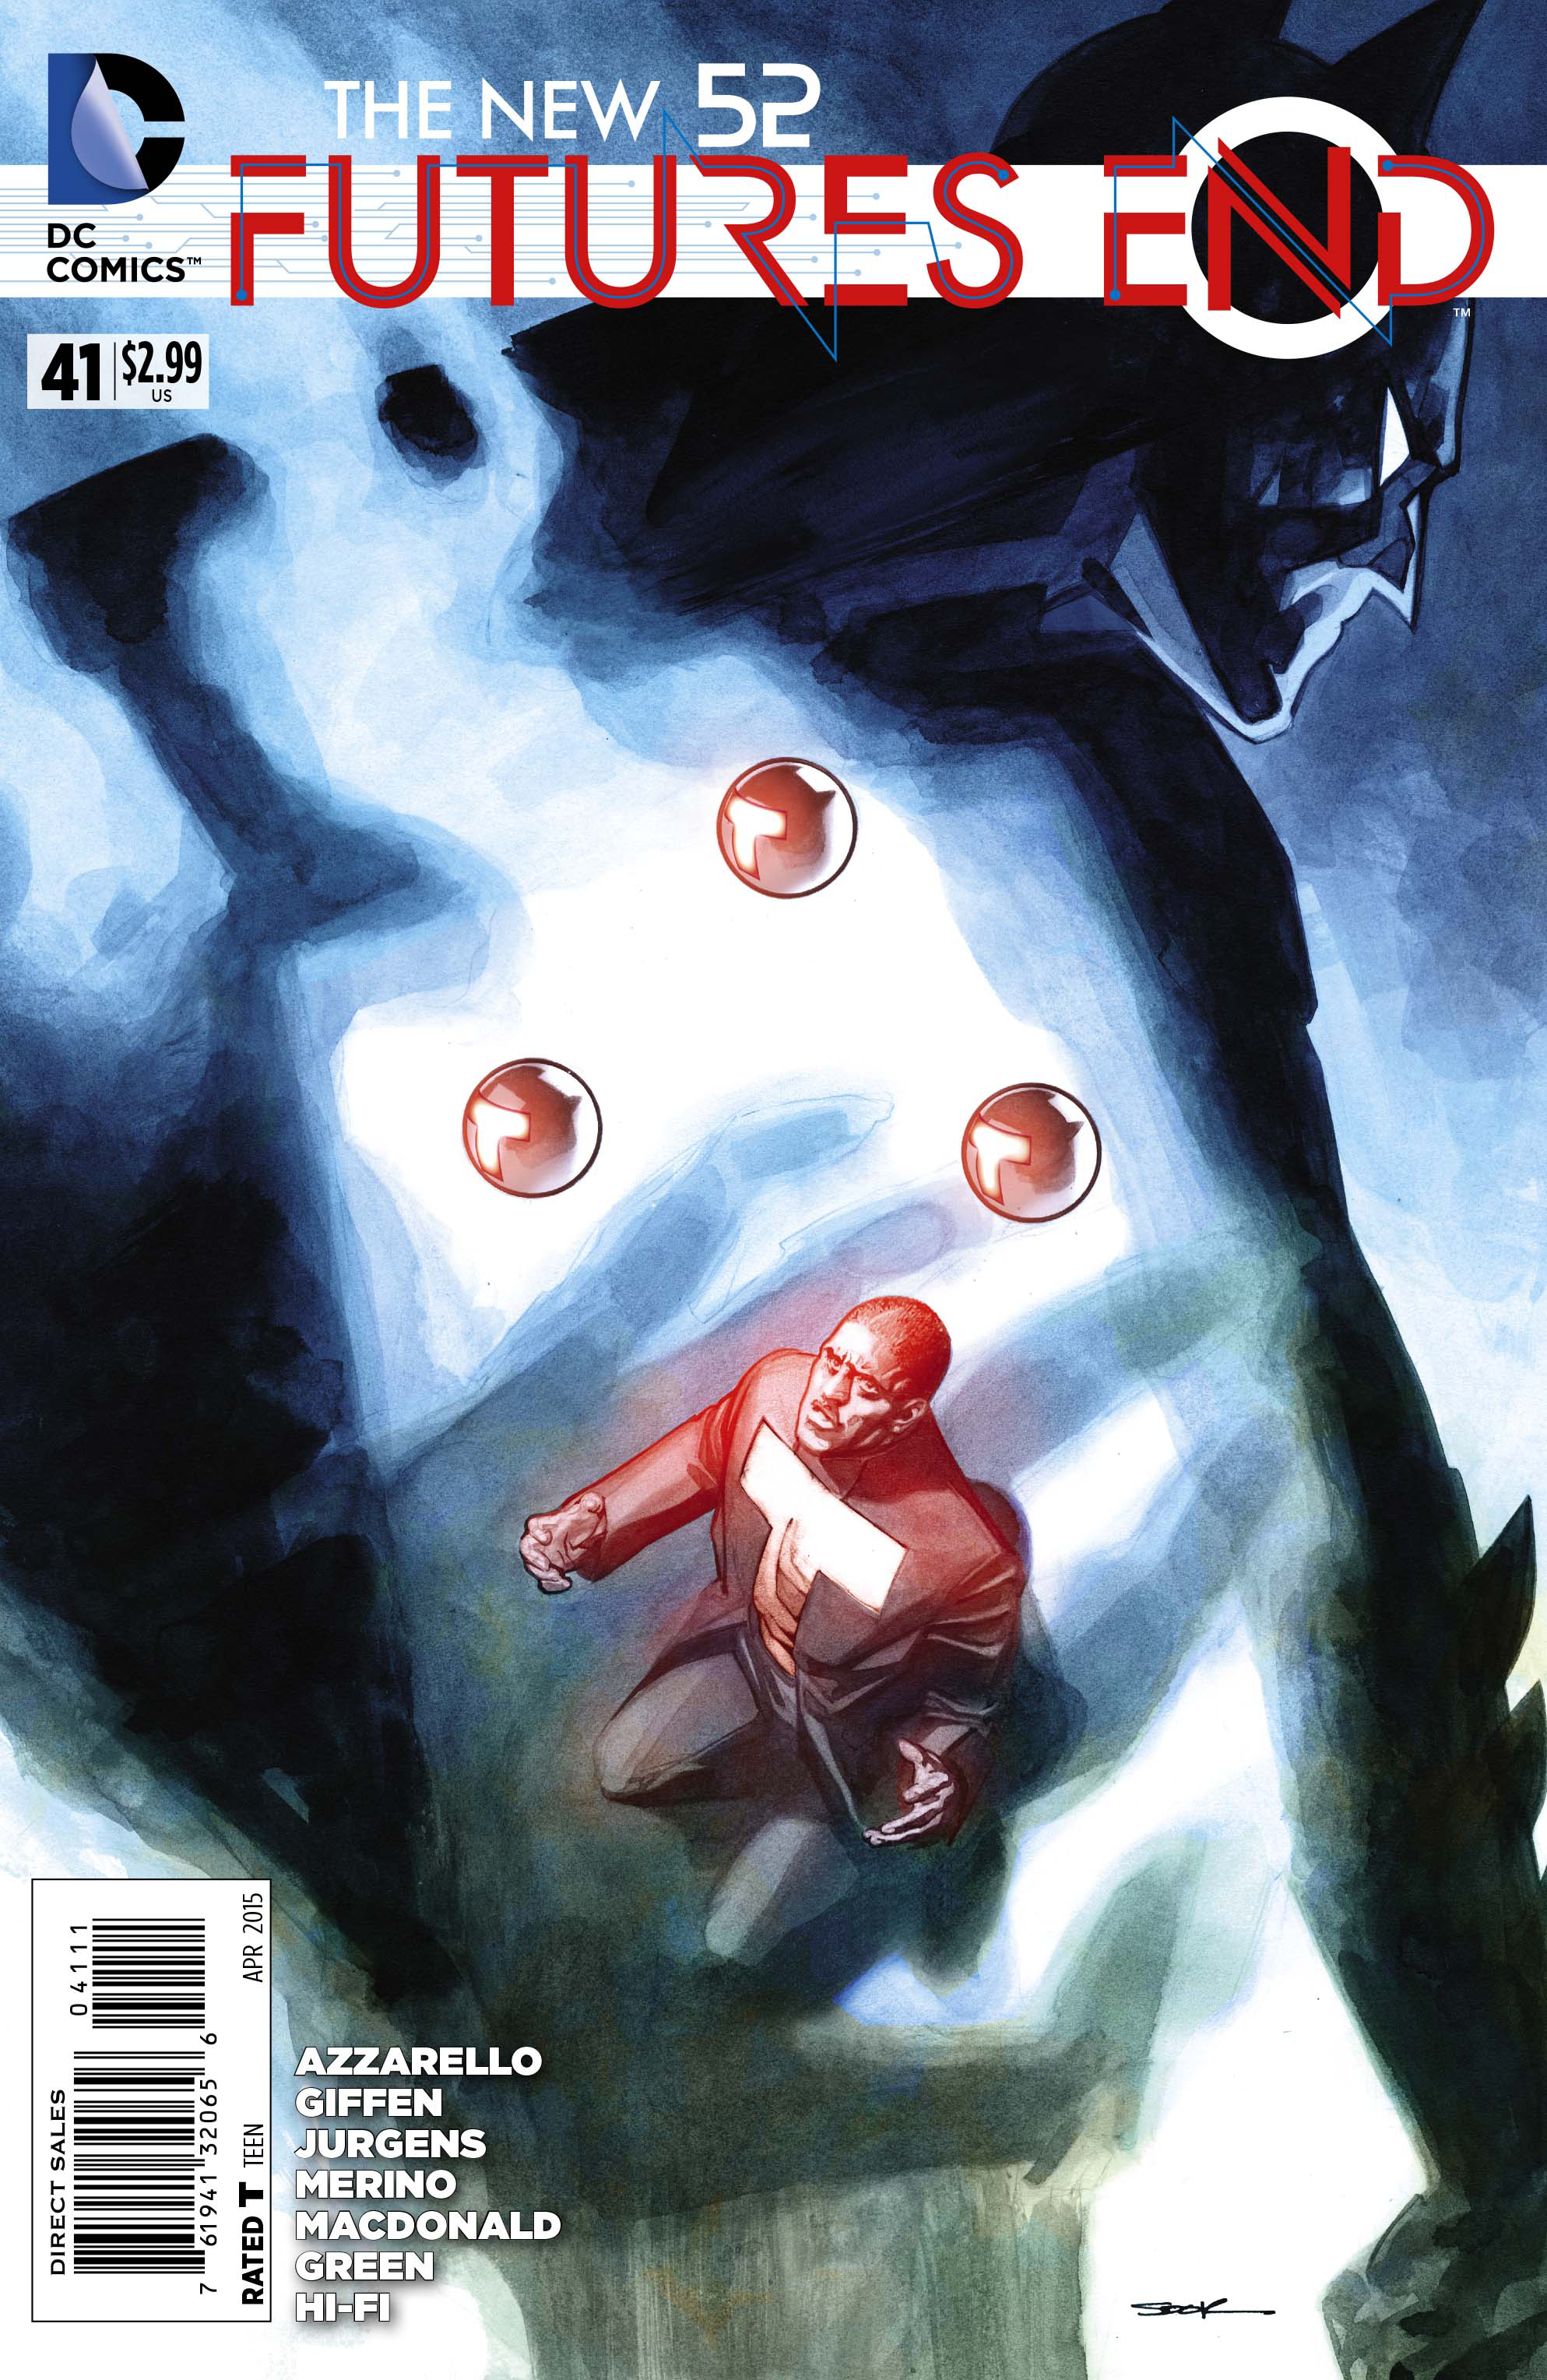 NEW 52 FUTURES END #41 (WEEKLY)